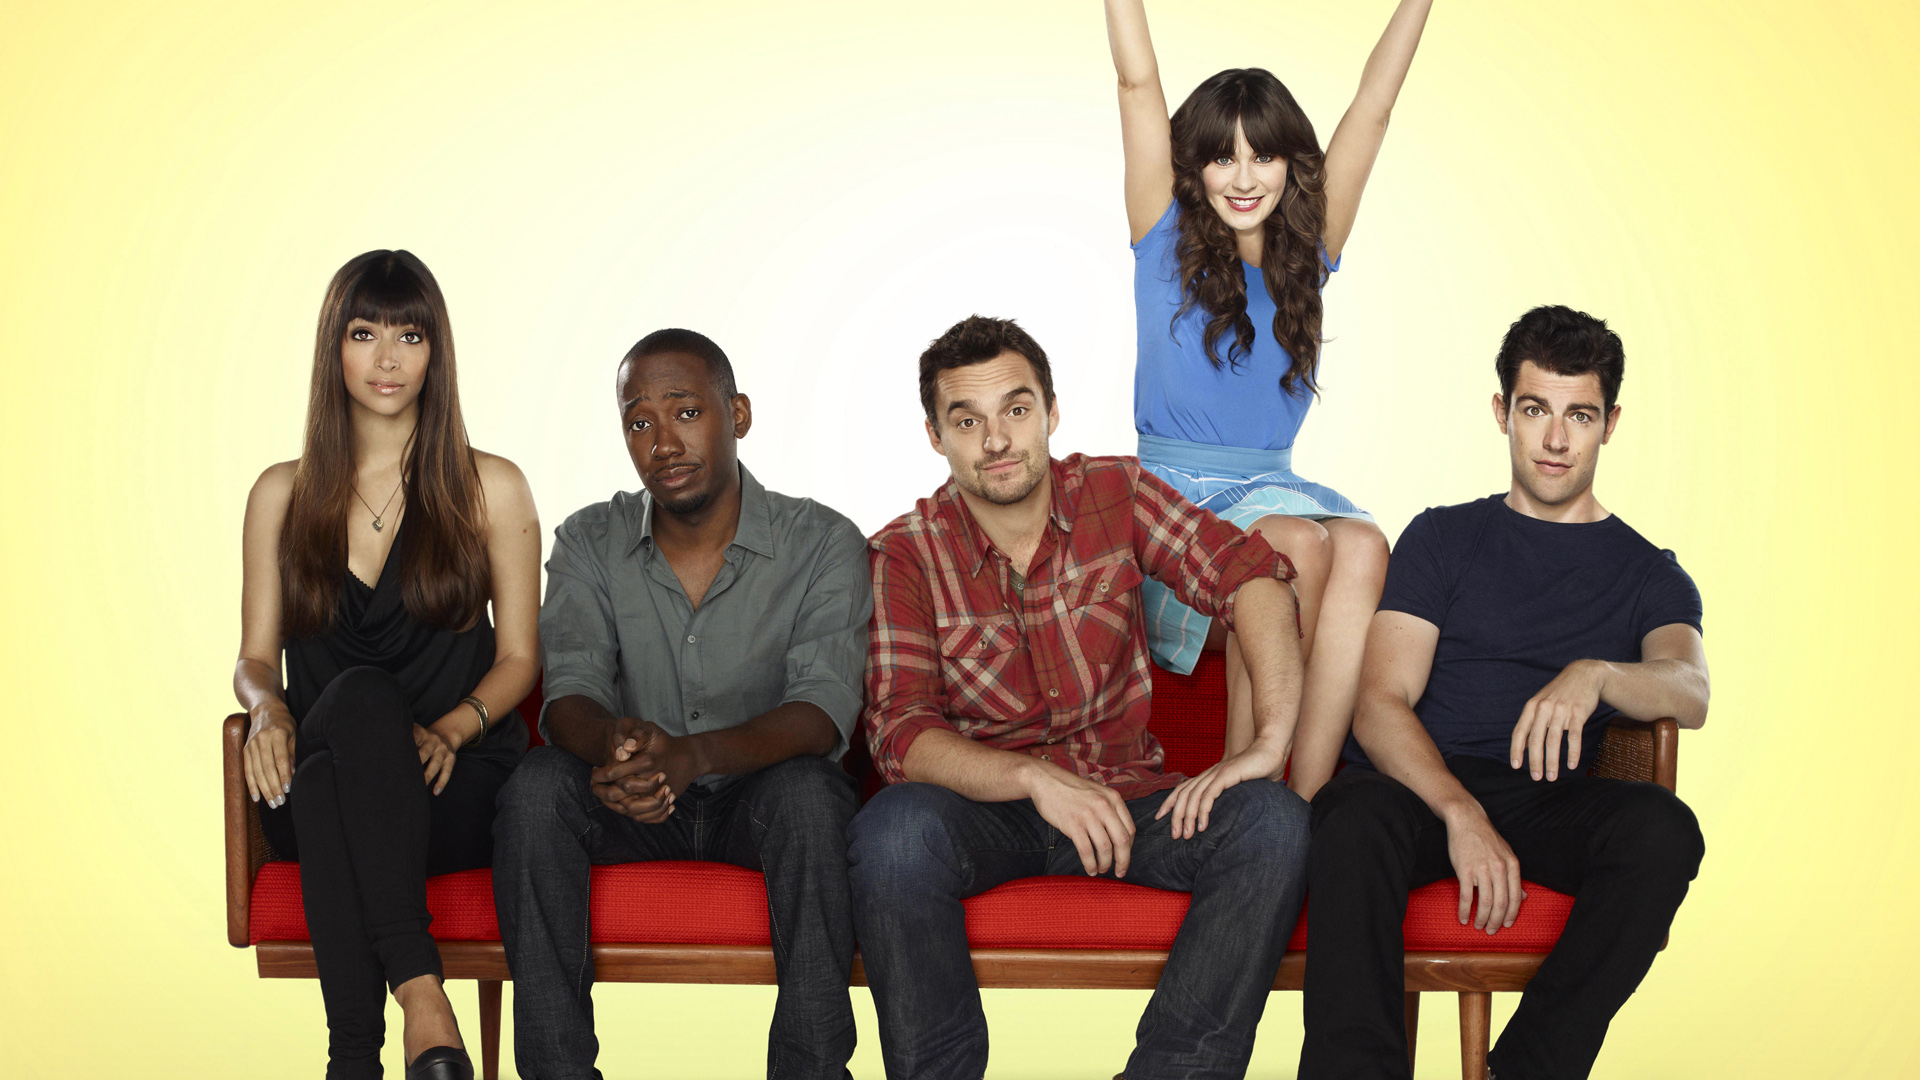 new girl wallpaper,social group,people,youth,sitting,fun